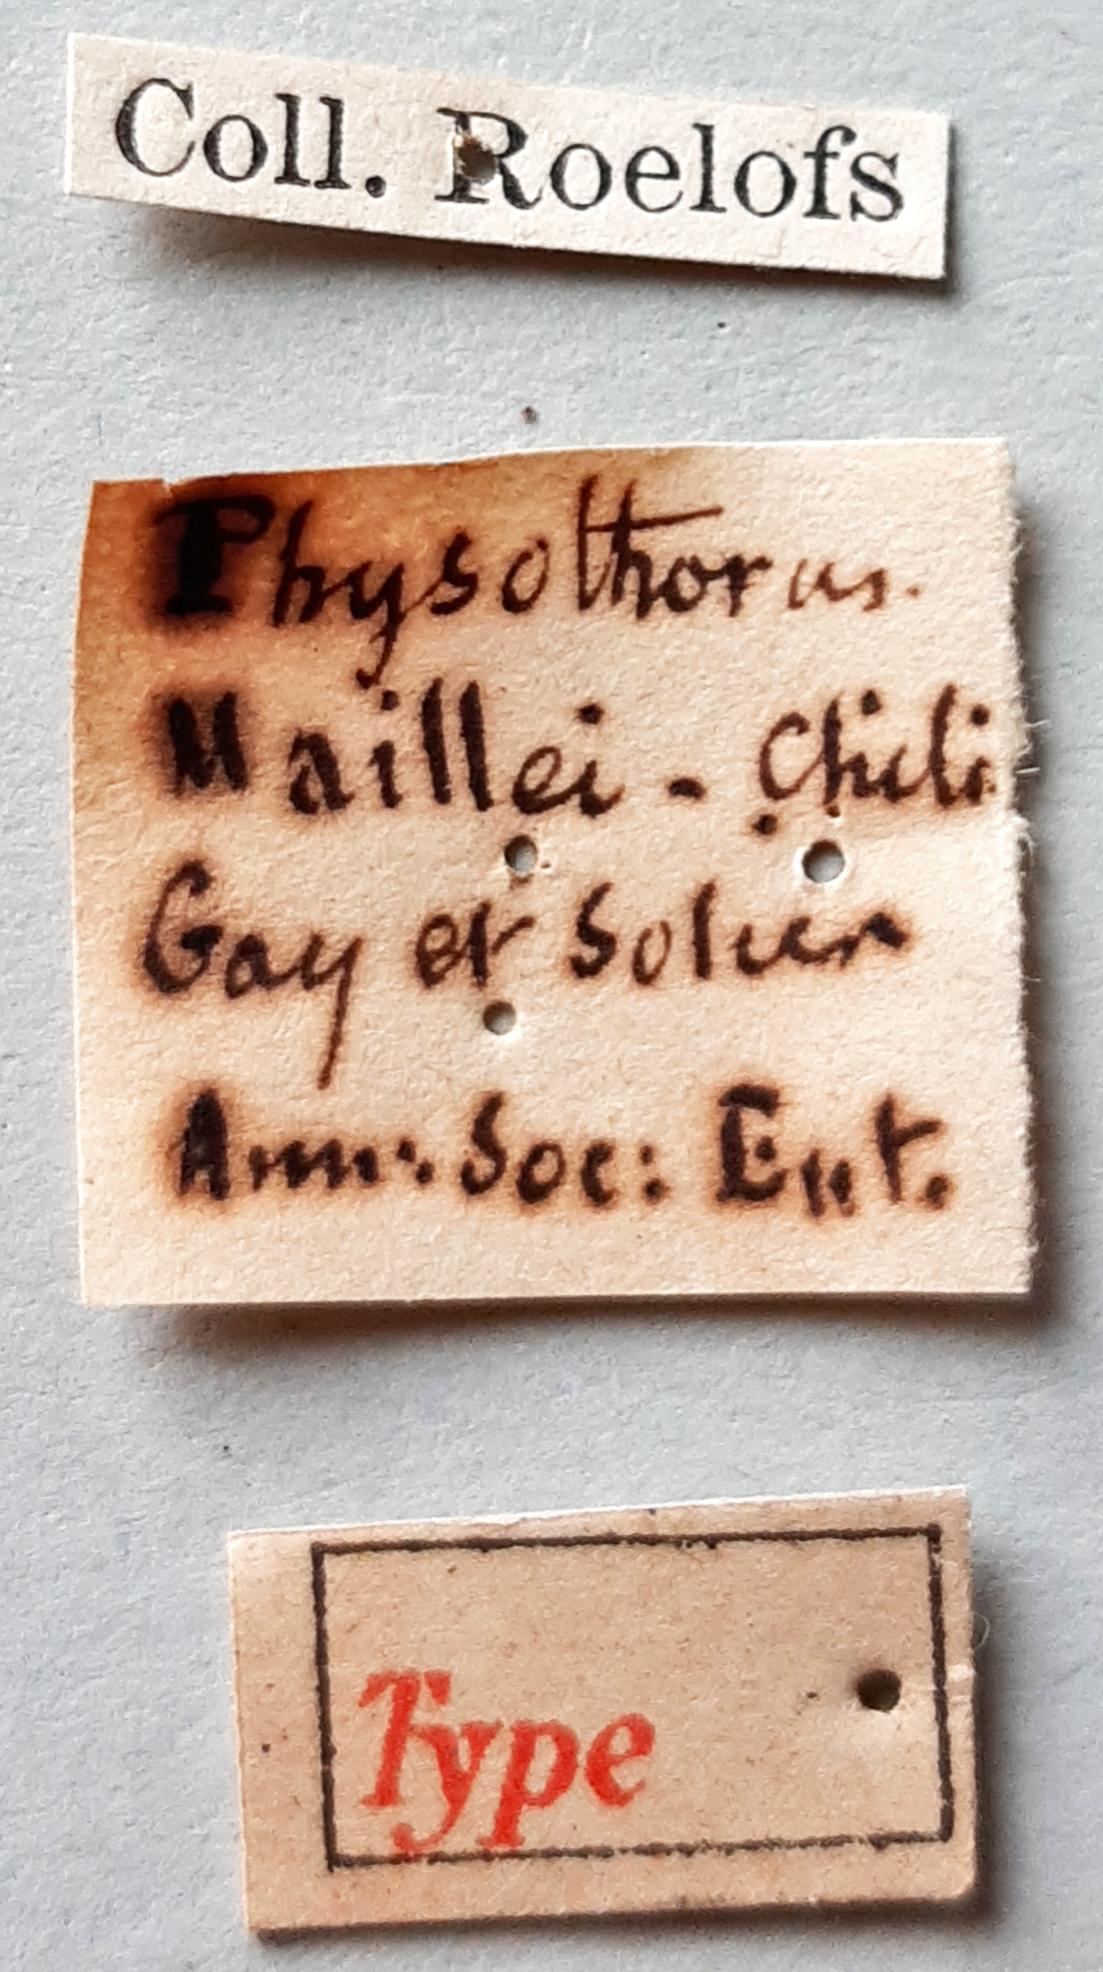 Physothorus maileii Ht labels